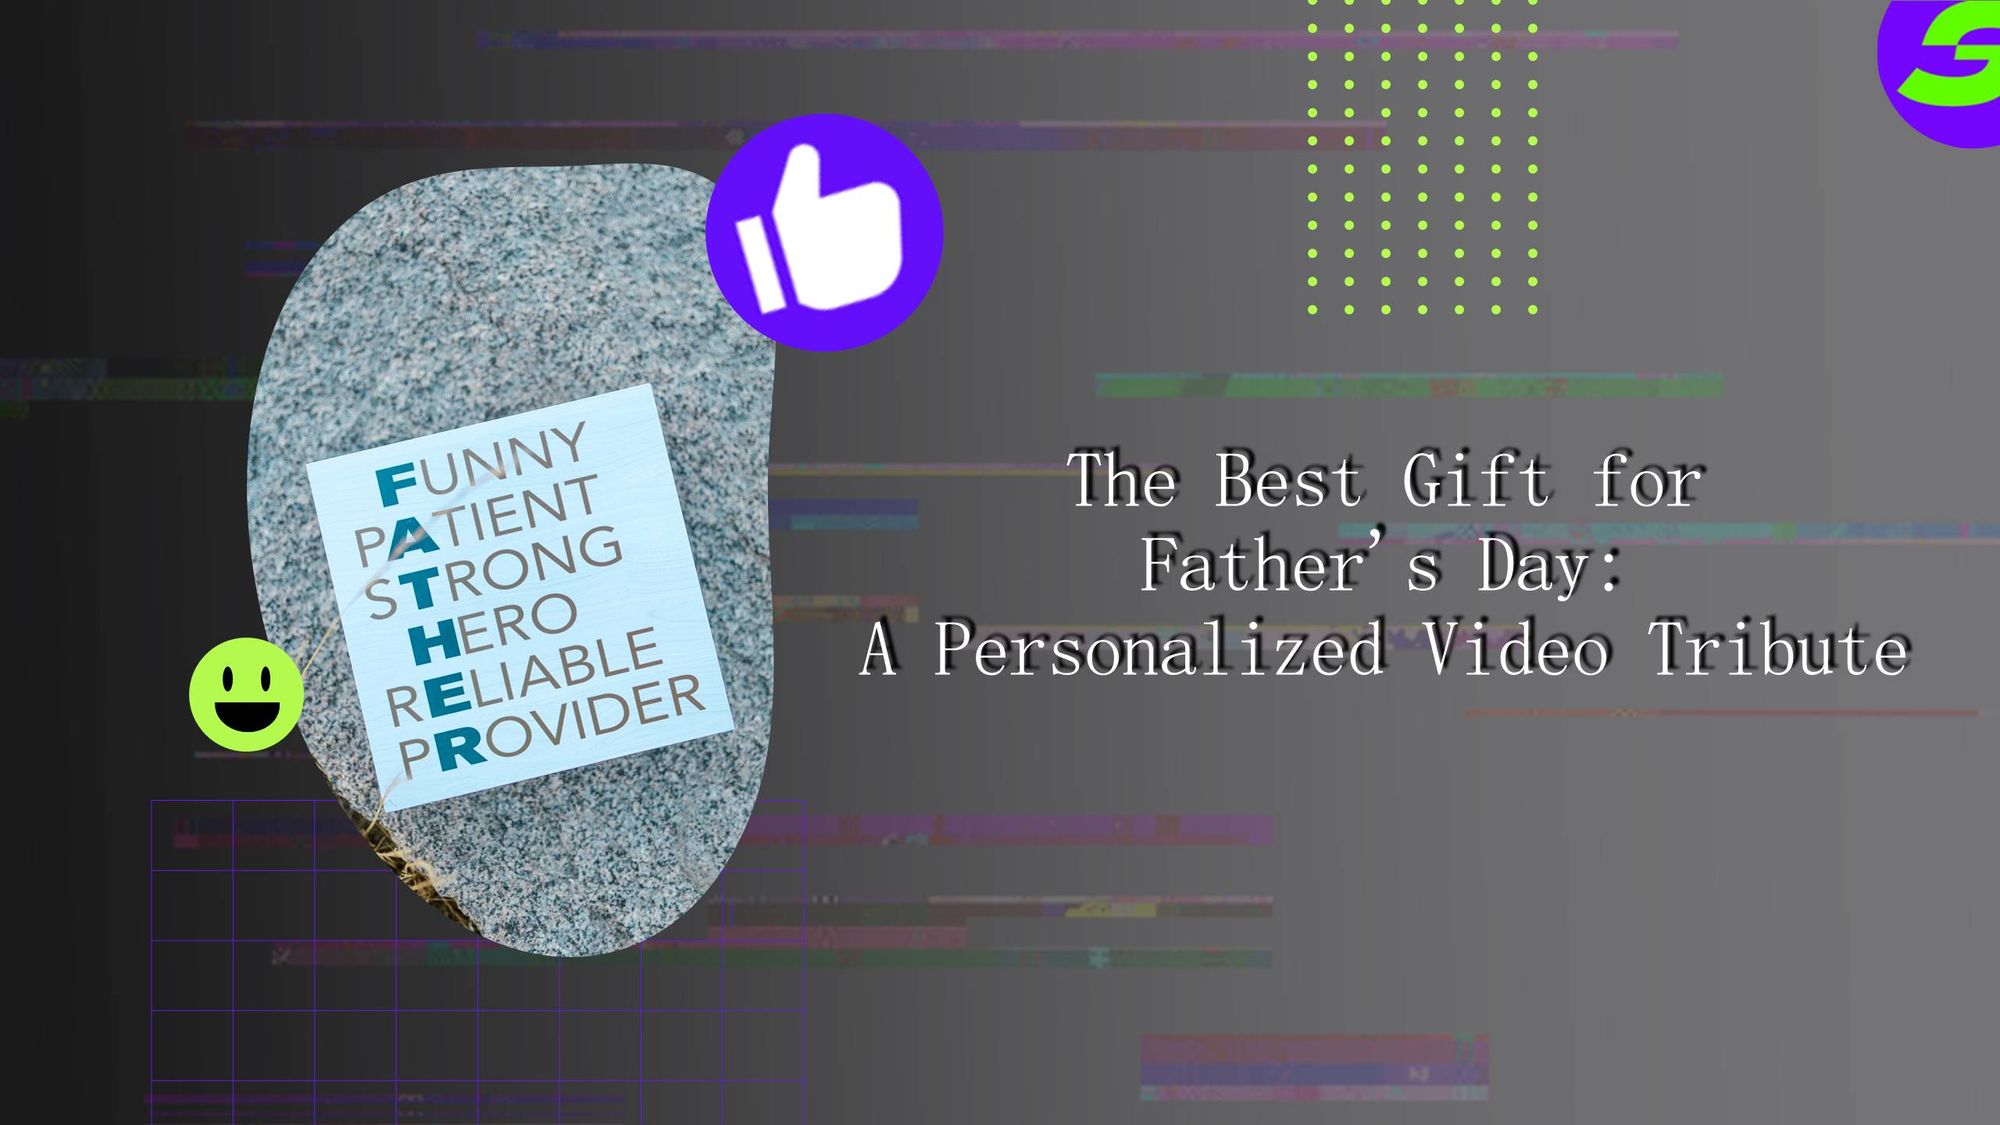 Make the best gift for Father's Day with ShotCut Free video editor